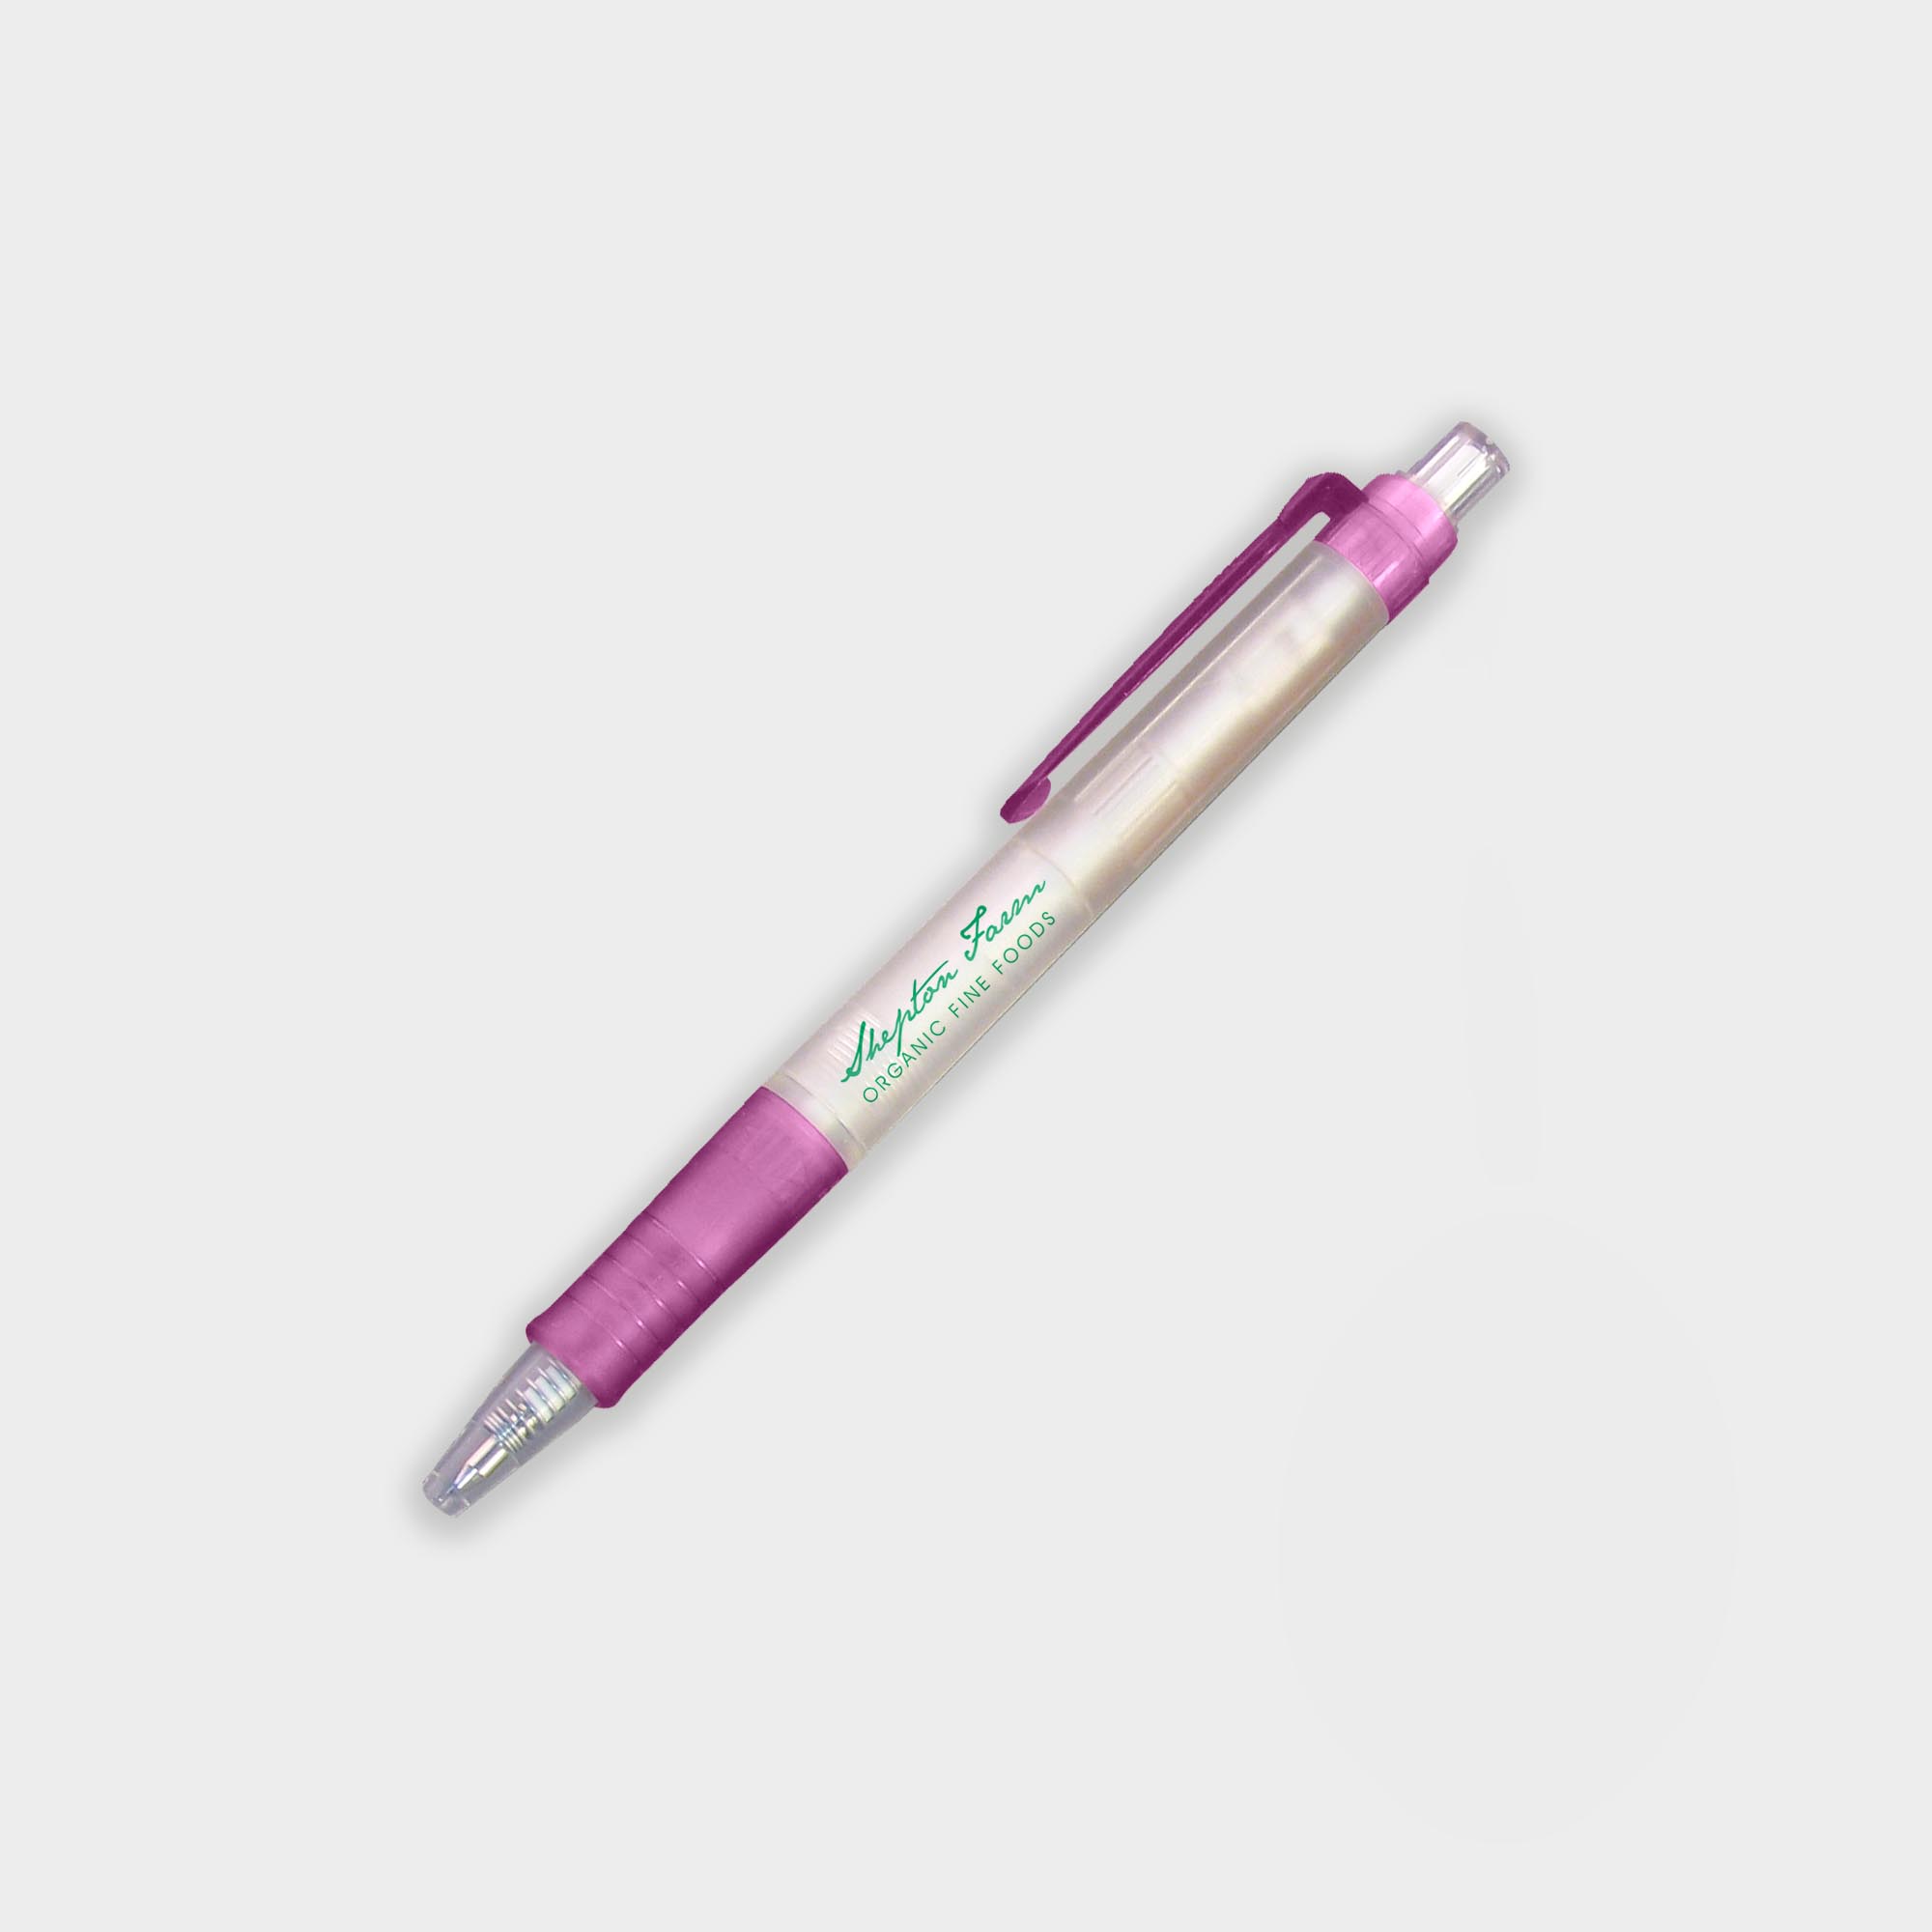 The Green & Good Bio Frost Biodegradable Pen. Corn based plastic pen with a frosted body and a push button. Available in a wide range of trim colours. Black ink as standard. Pink